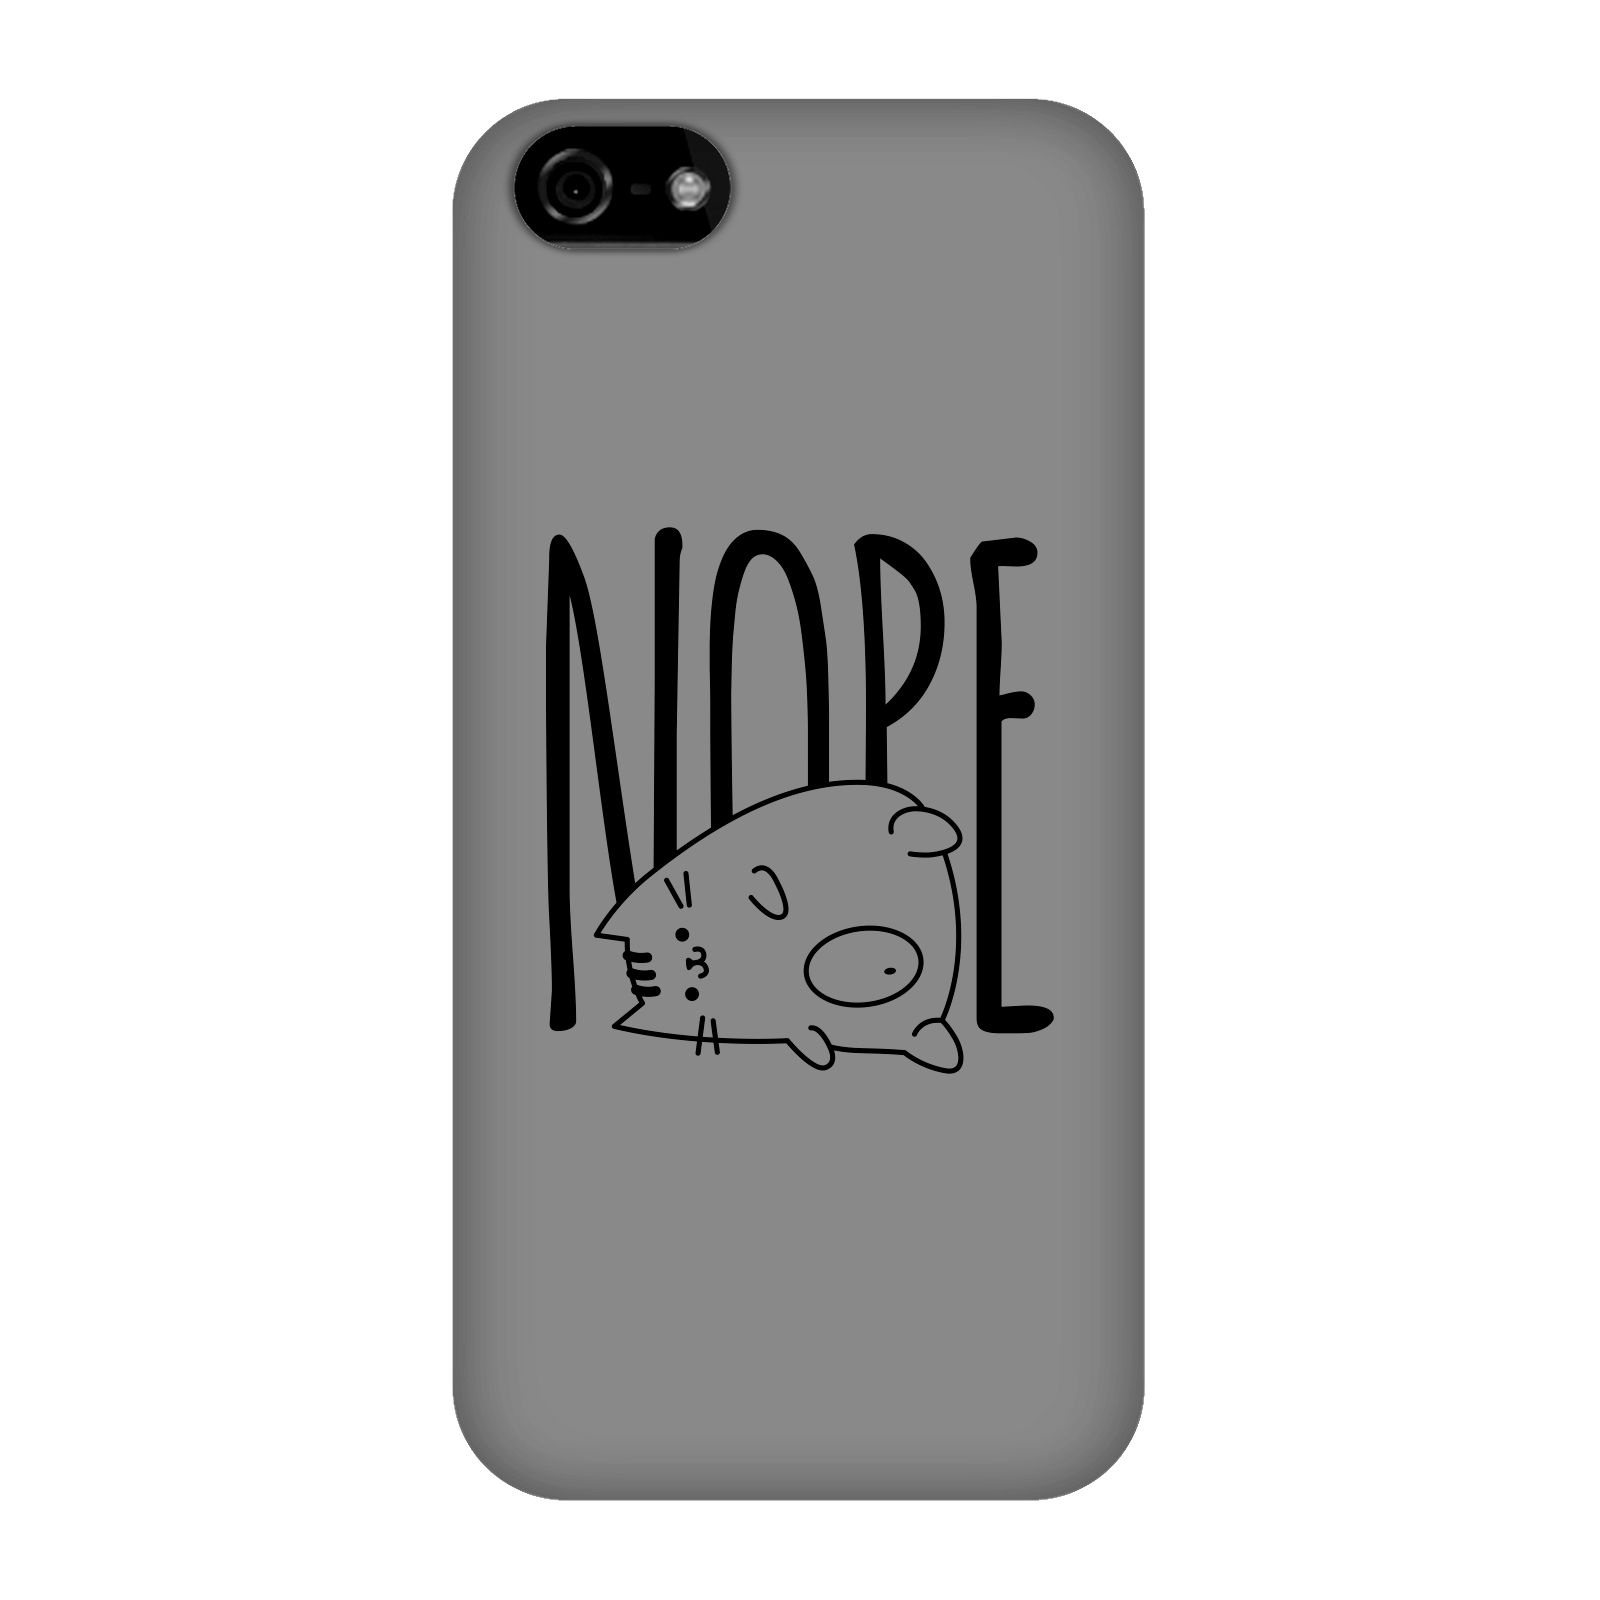 Nope Phone Case for iPhone and Android - iPhone 5C - Snap Case - Matte